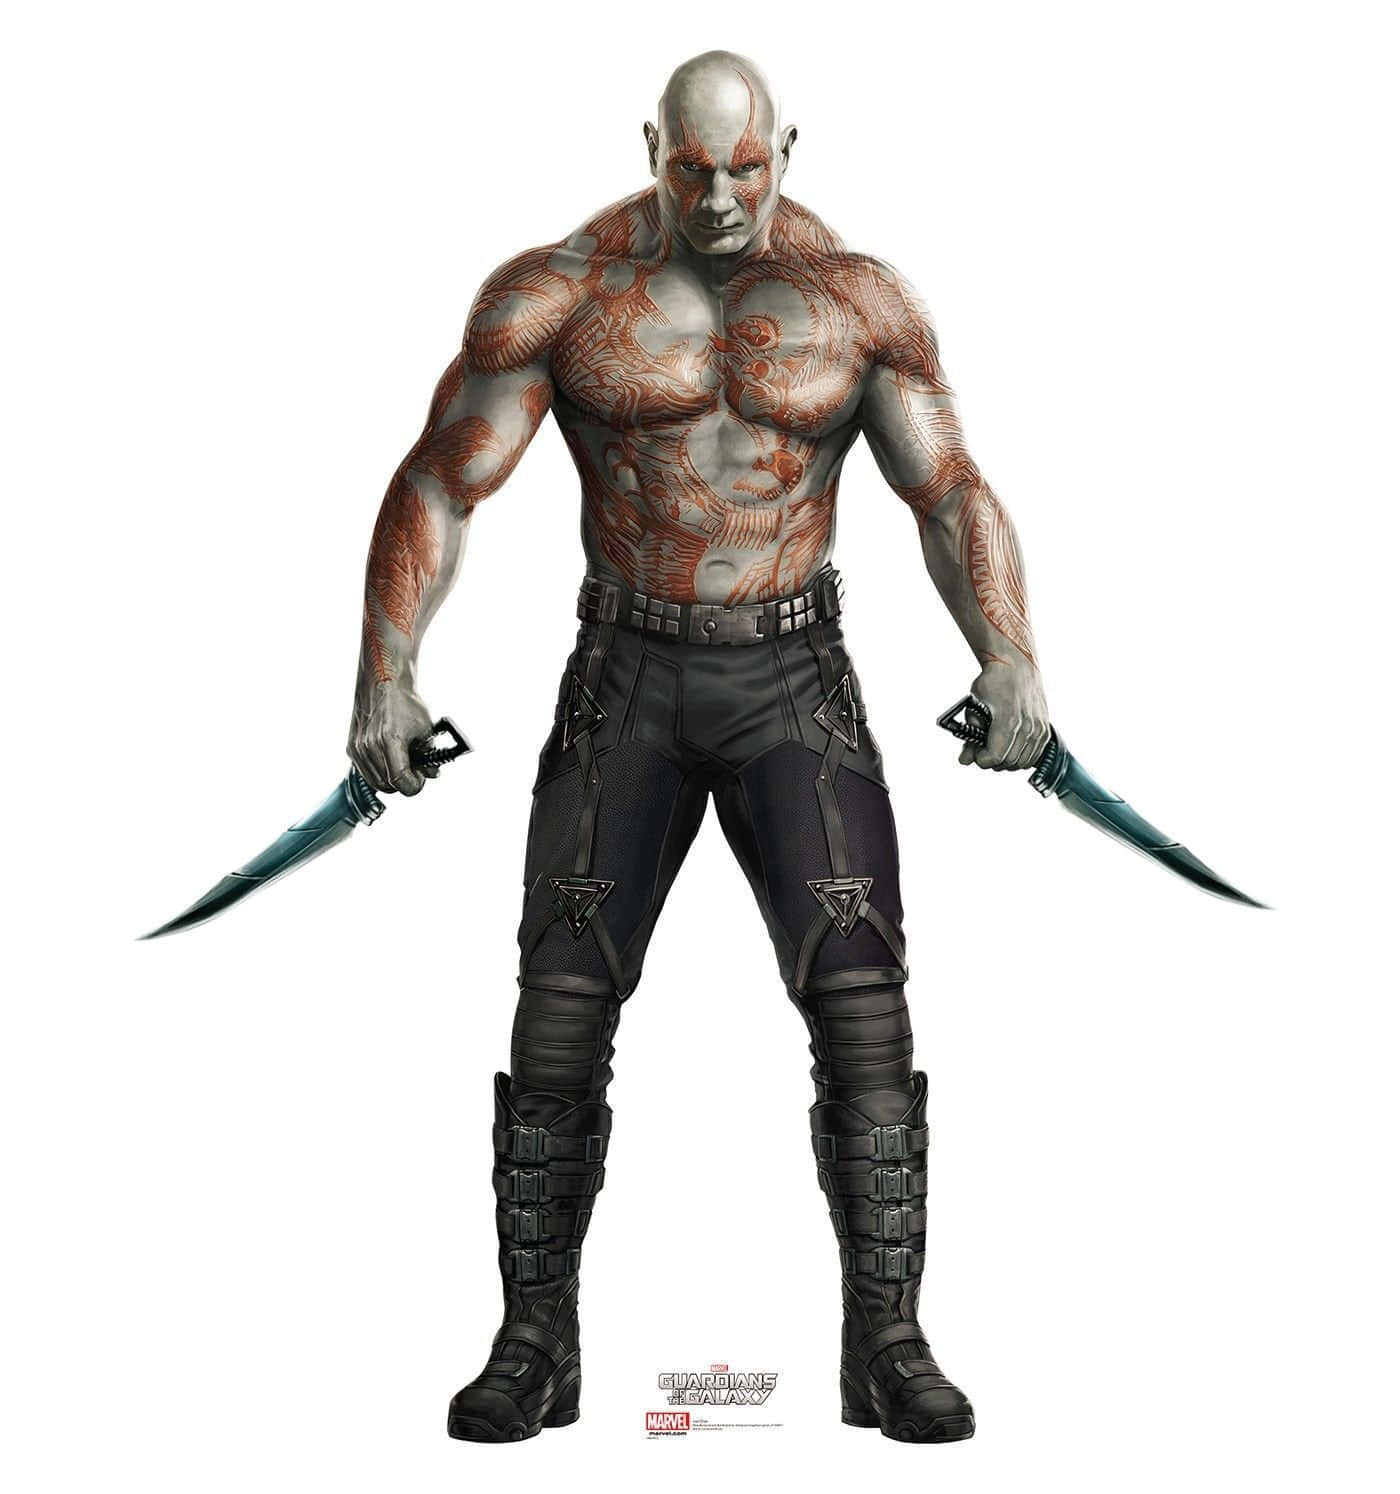 Drax, the Ravager and member of the Guardians of the Galaxy Wallpaper